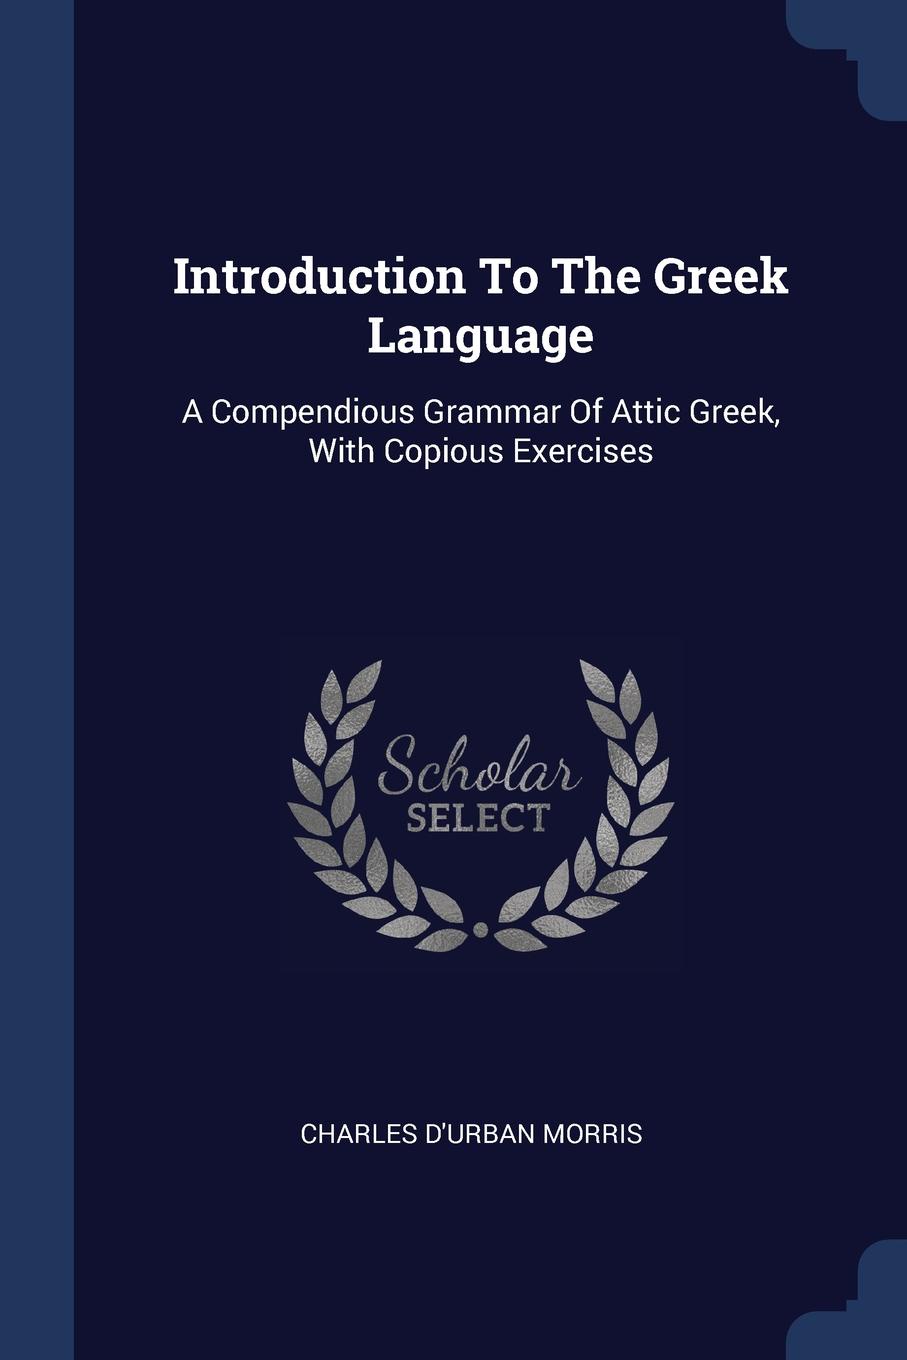 Introduction To The Greek Language. A Compendious Grammar Of Attic Greek, With Copious Exercises